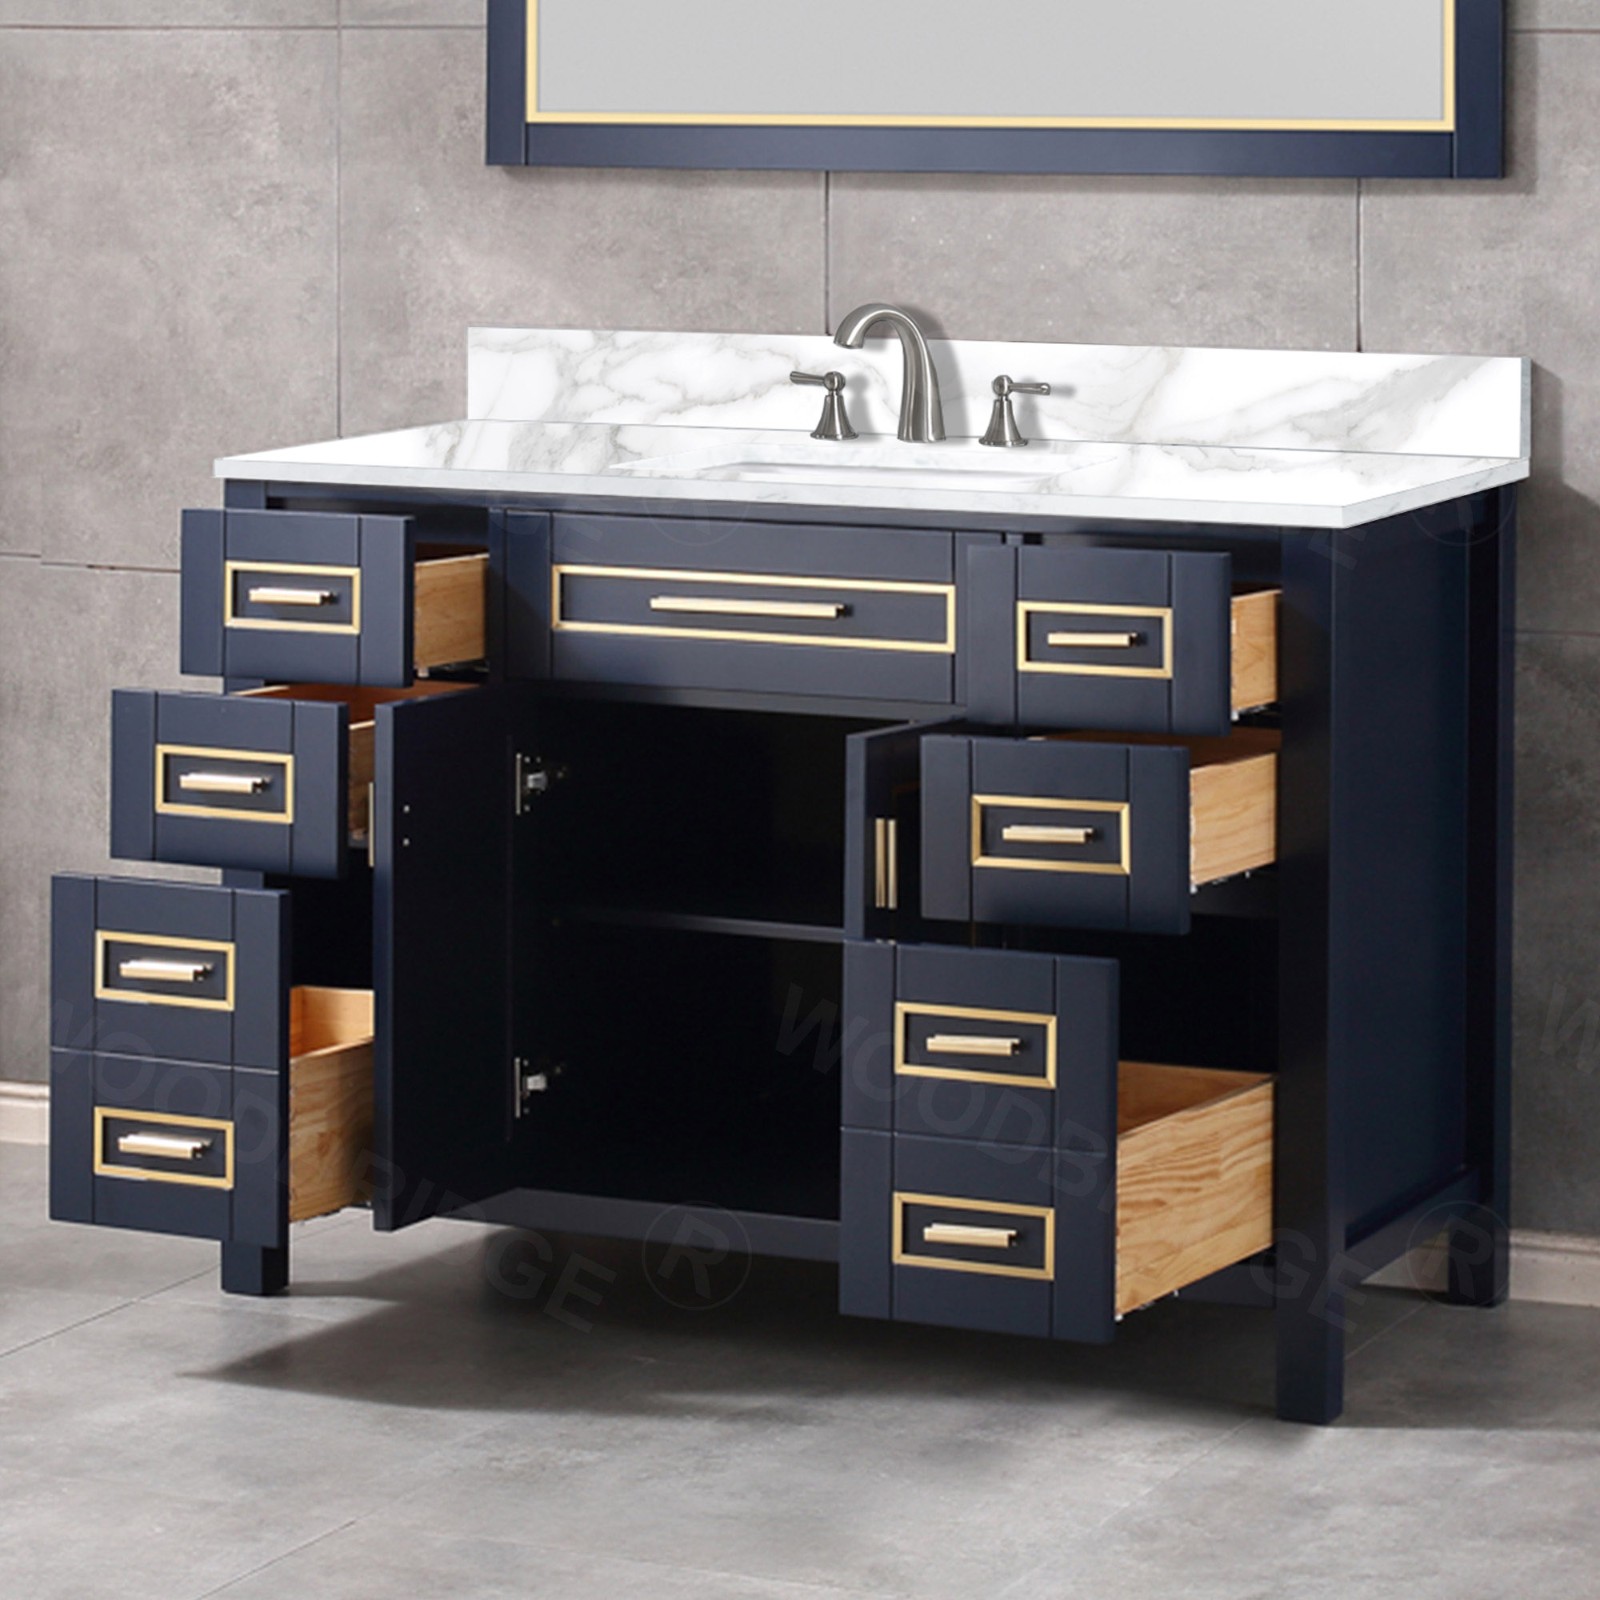  WOODBRIDGE Milan  49” Floor Mounted Single Basin Vanity Set with Solid Wood Cabinet in Navy Blue and Engineered stone composite Vanity Top in Fish Belly White with Pre-installed Undermount Rectangle Bathroom Sink and Pre-Drilled 3-Hole for 8” Widespread F_4714